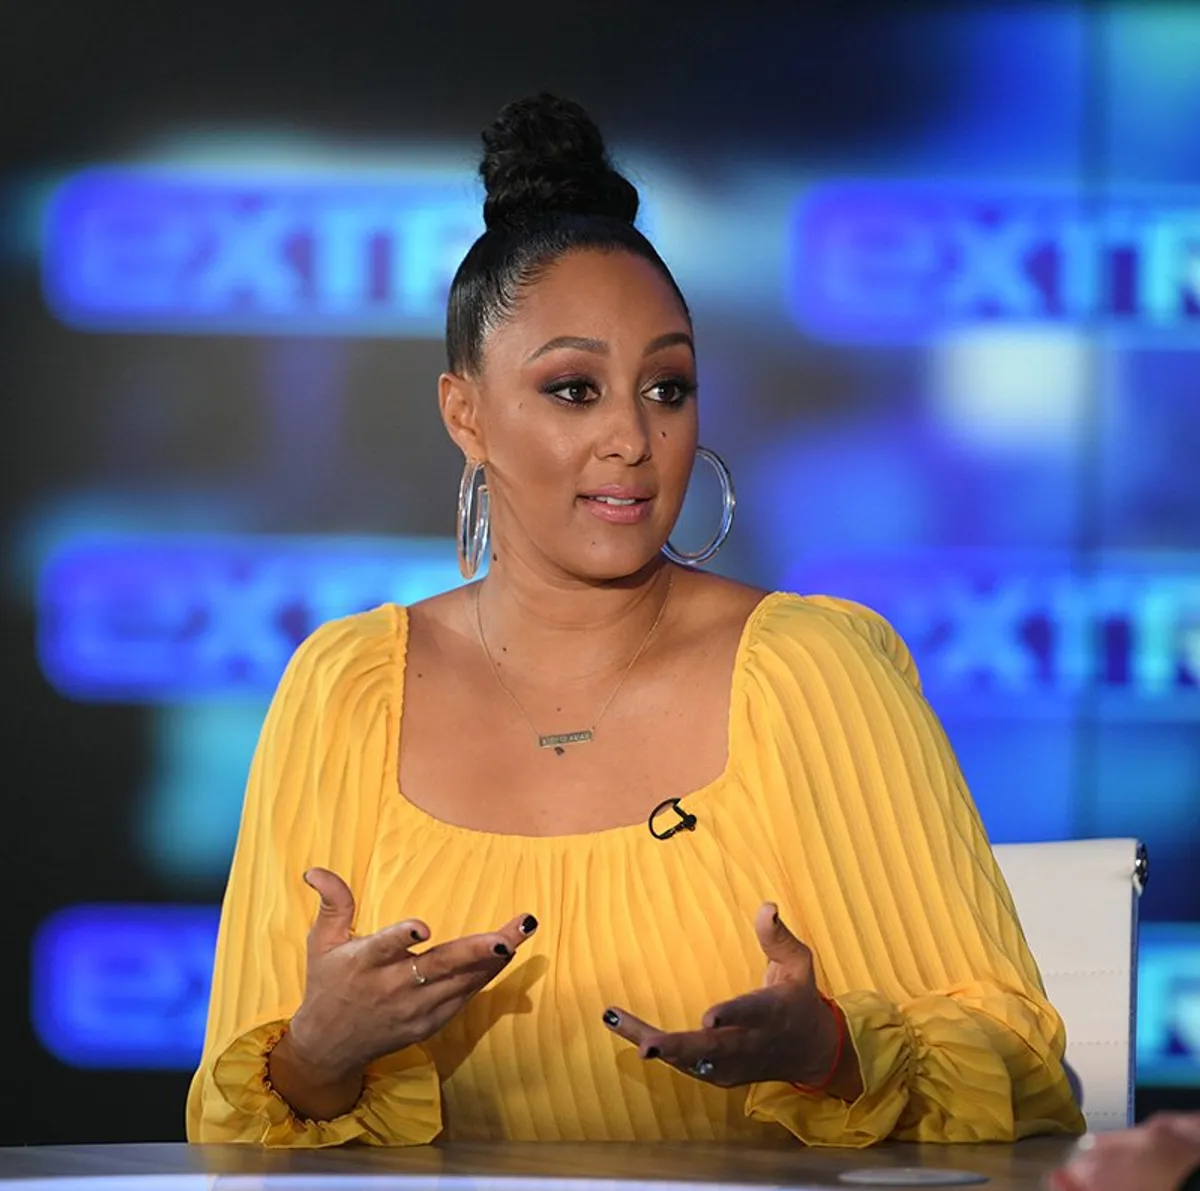 amera Mowry at the "Extra" TV show in Burbank Studios on November 5, 2019. I Photo: Getty Images